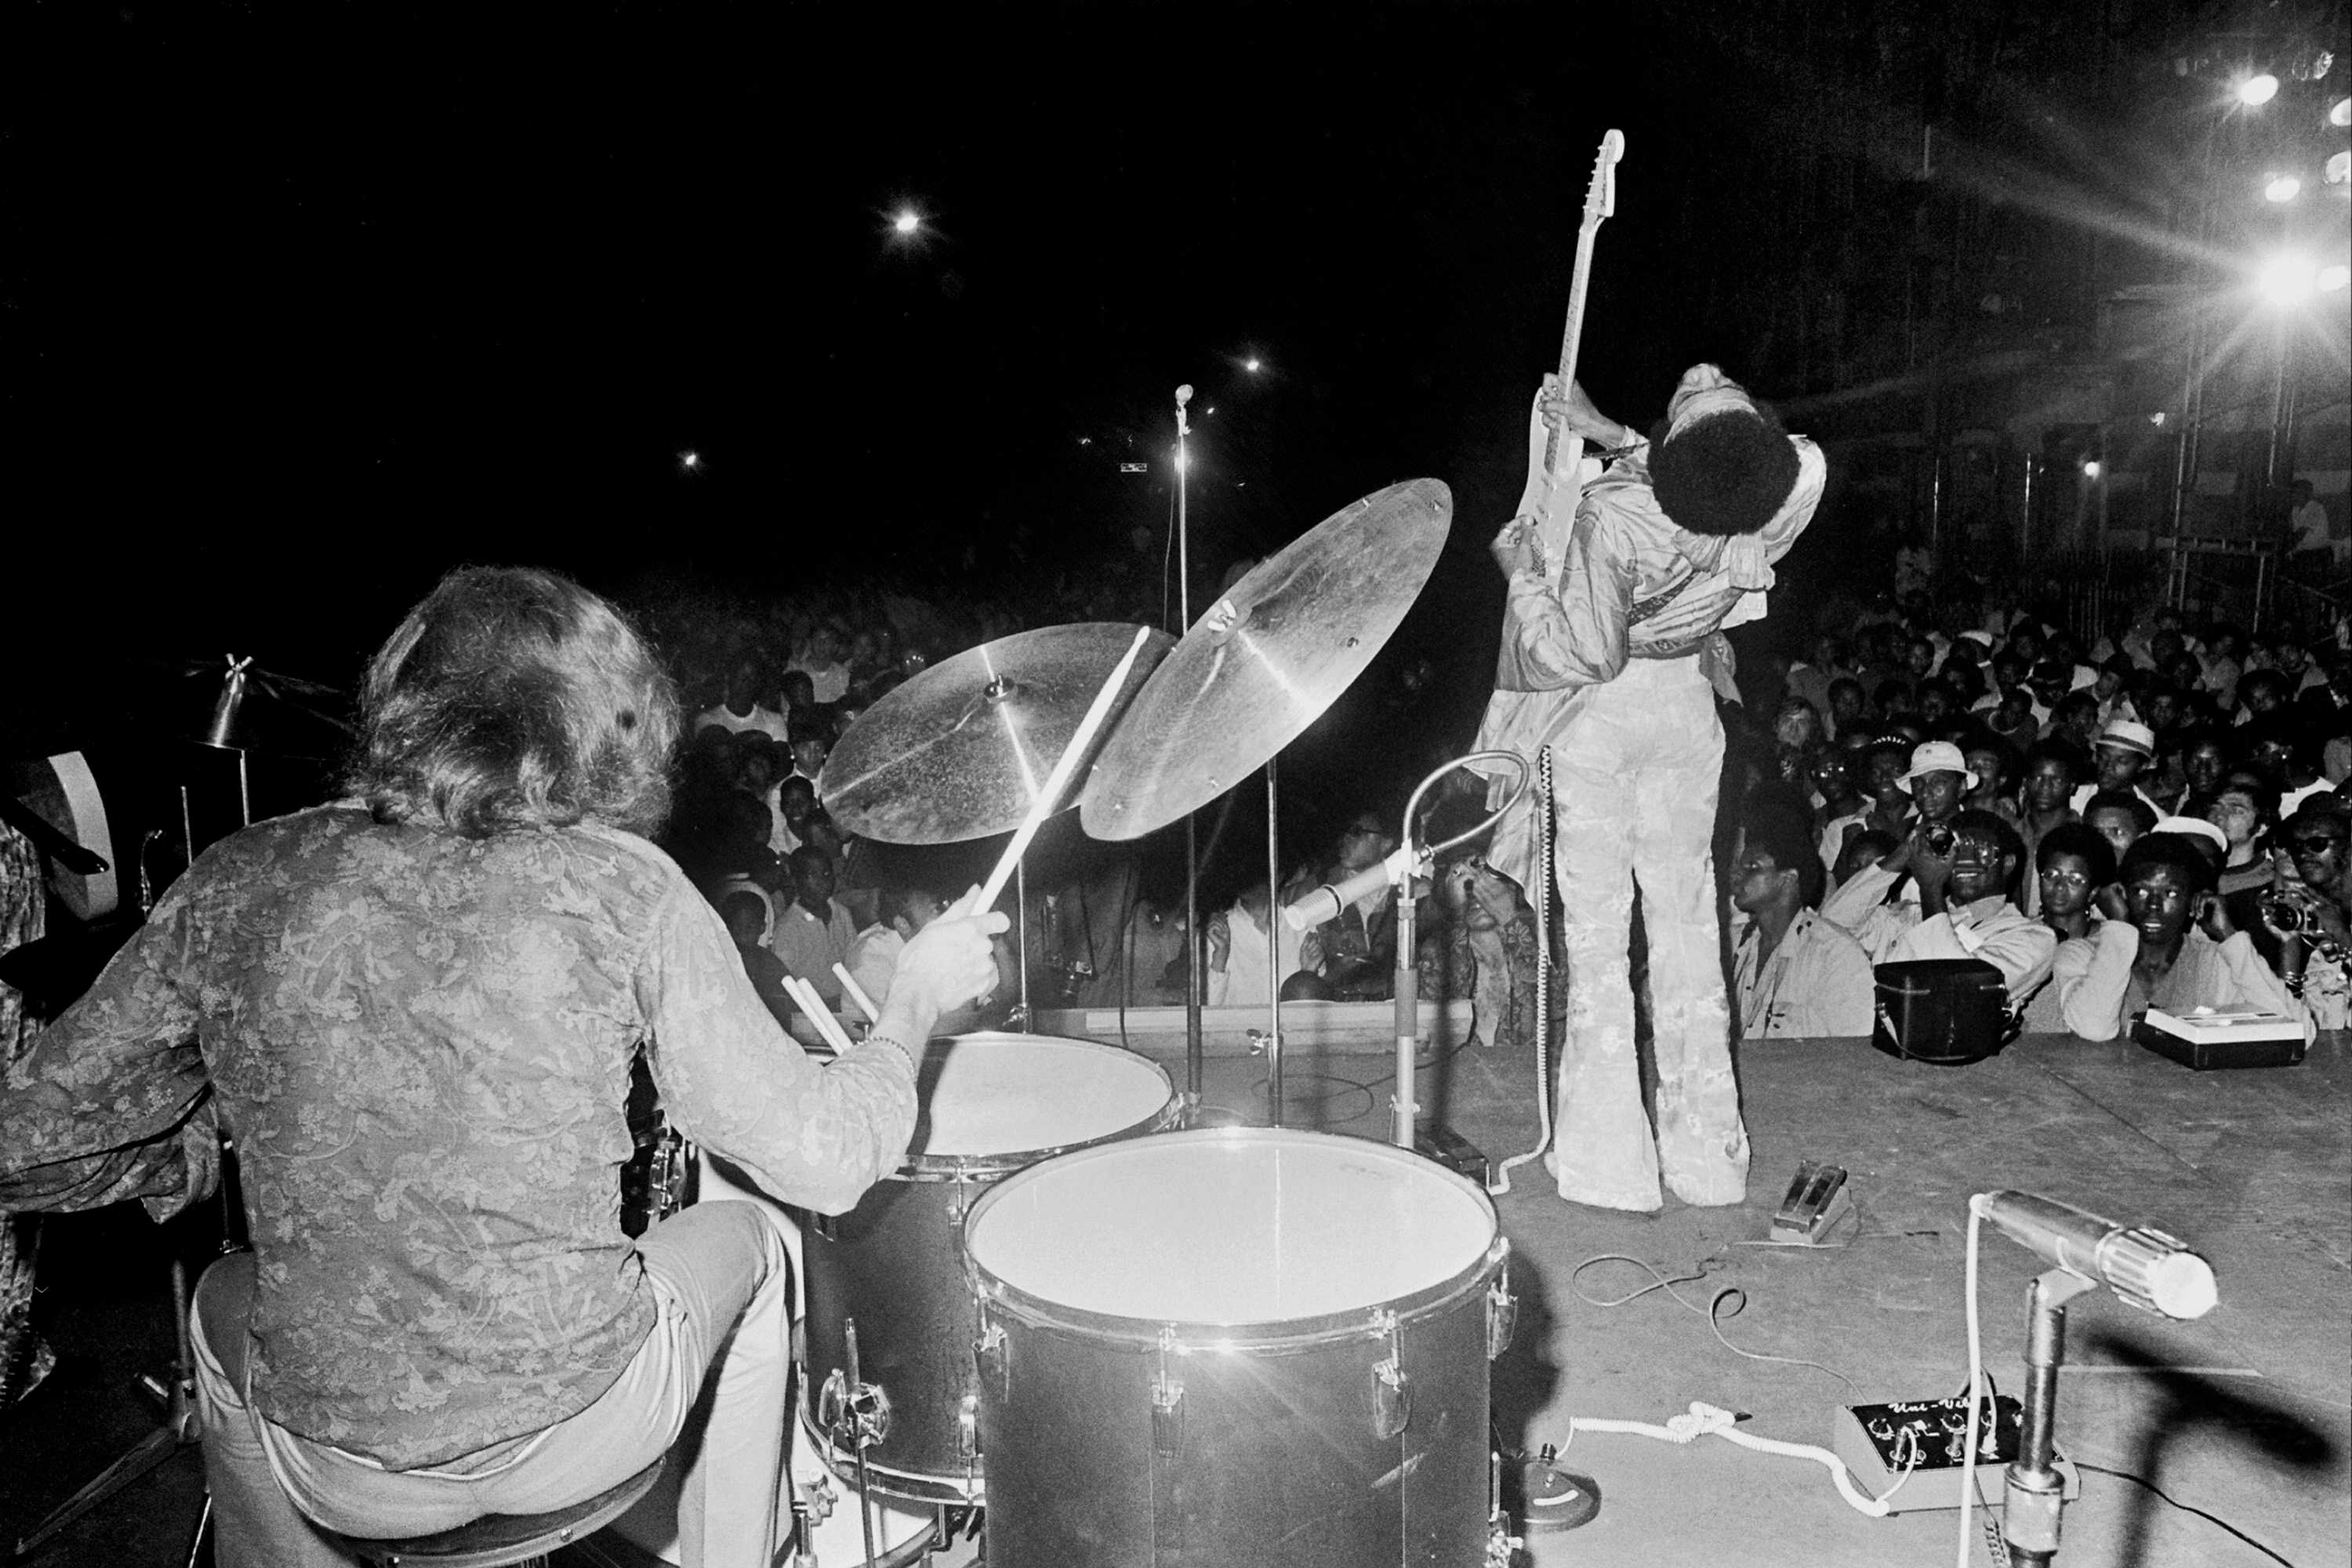 A photograph from the back of the stage as Hendrix is playing to an audience. His drummer is in the left corner of the frame.